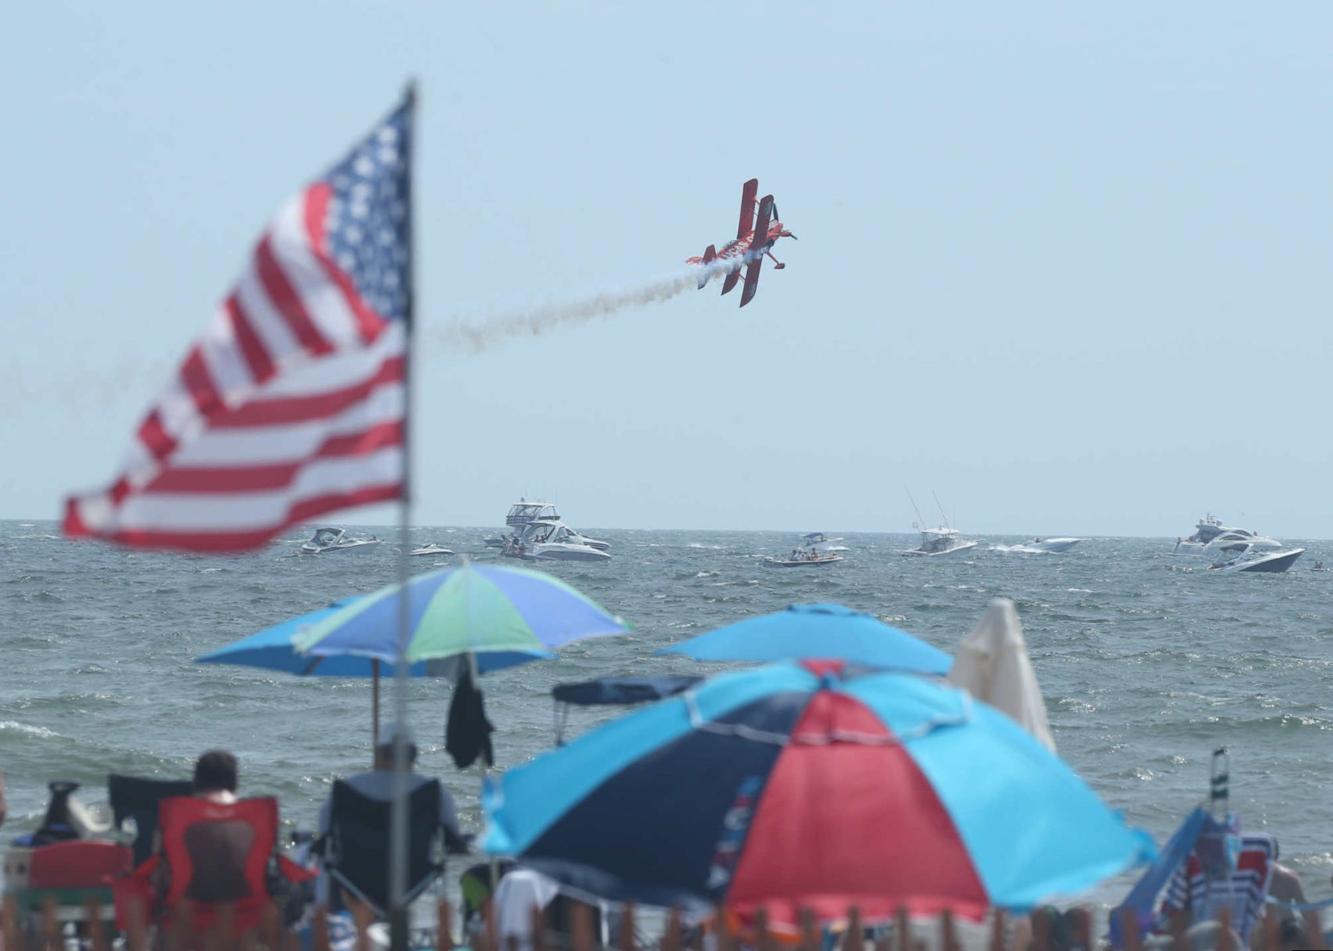 Schedule announced for Atlantic City Airshow